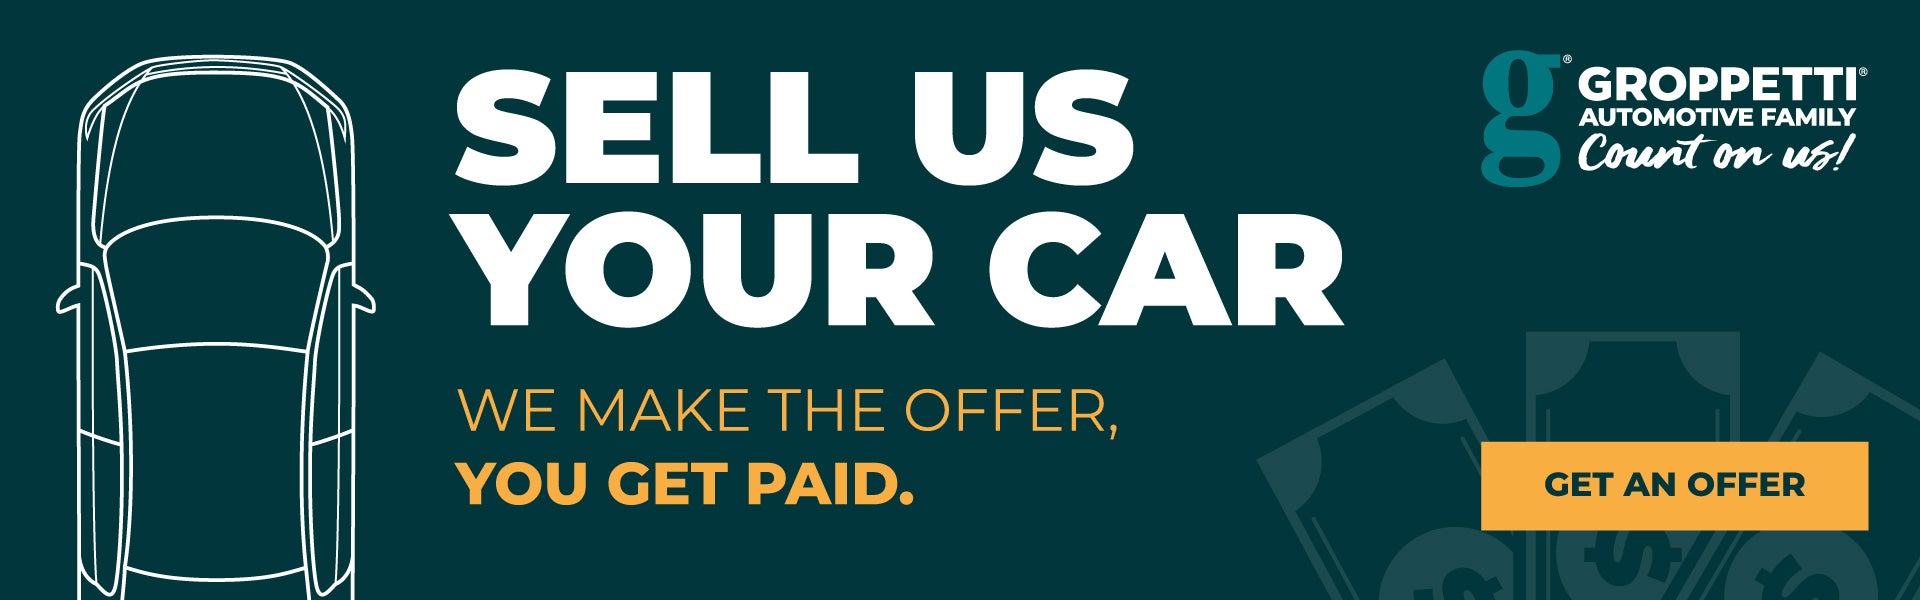 Sell Us Your Car – We make the offer, you get paid.